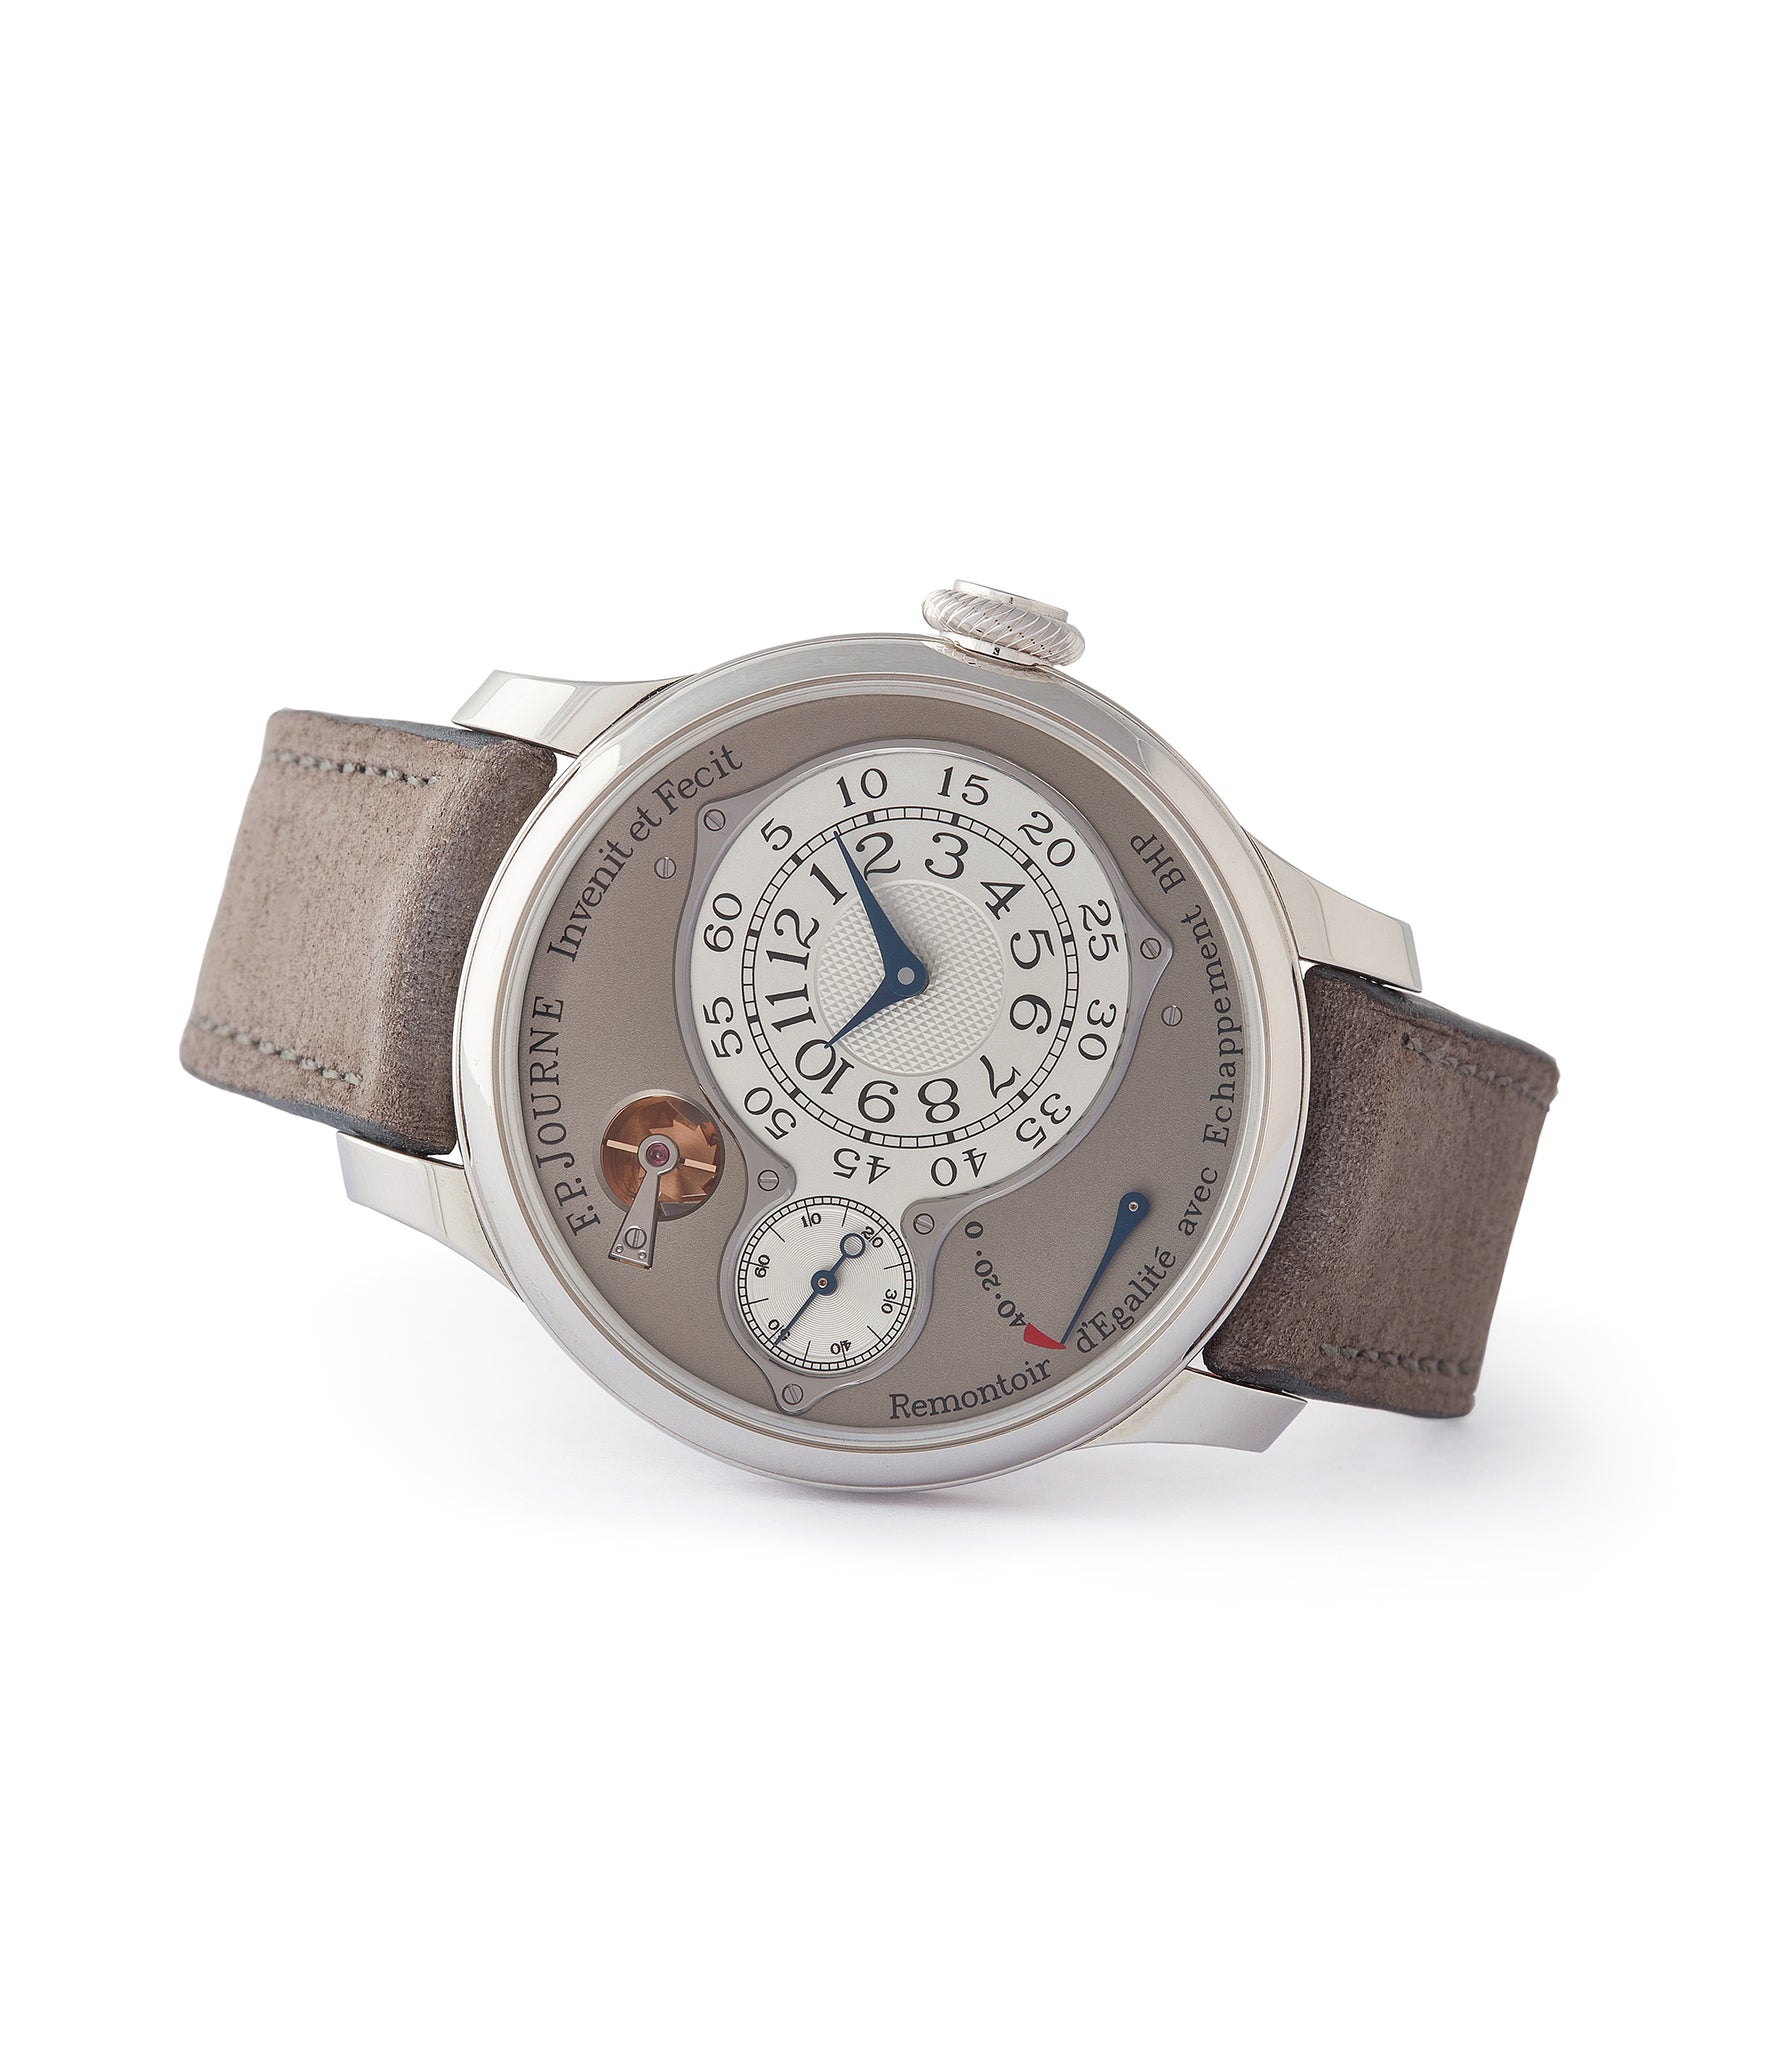 independent watchmaker F. P. Journe Chronometre Optimum grey dial time-only dress watch for sale online at A Collected Man London UK specialist rare watches